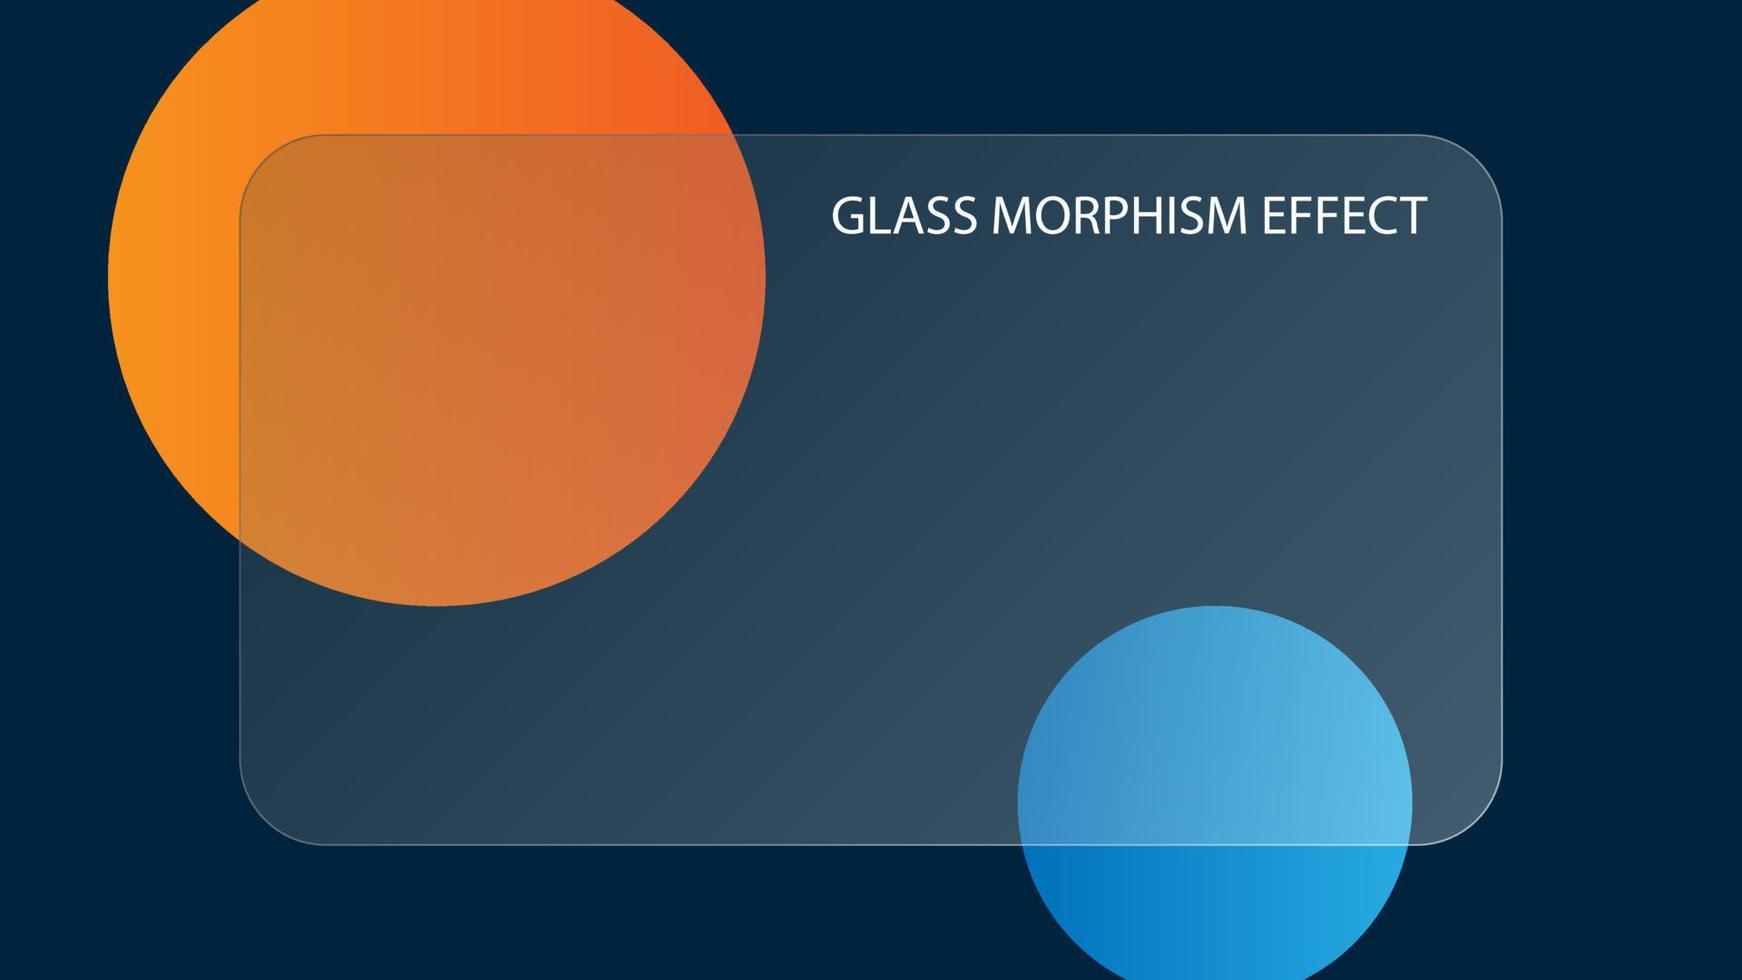 Transparent frame in trendy style glassmorphism or frosted glass. Trendy glassmorphism effect for sites, applications, wallpapers and internet projects. Vector illustration.